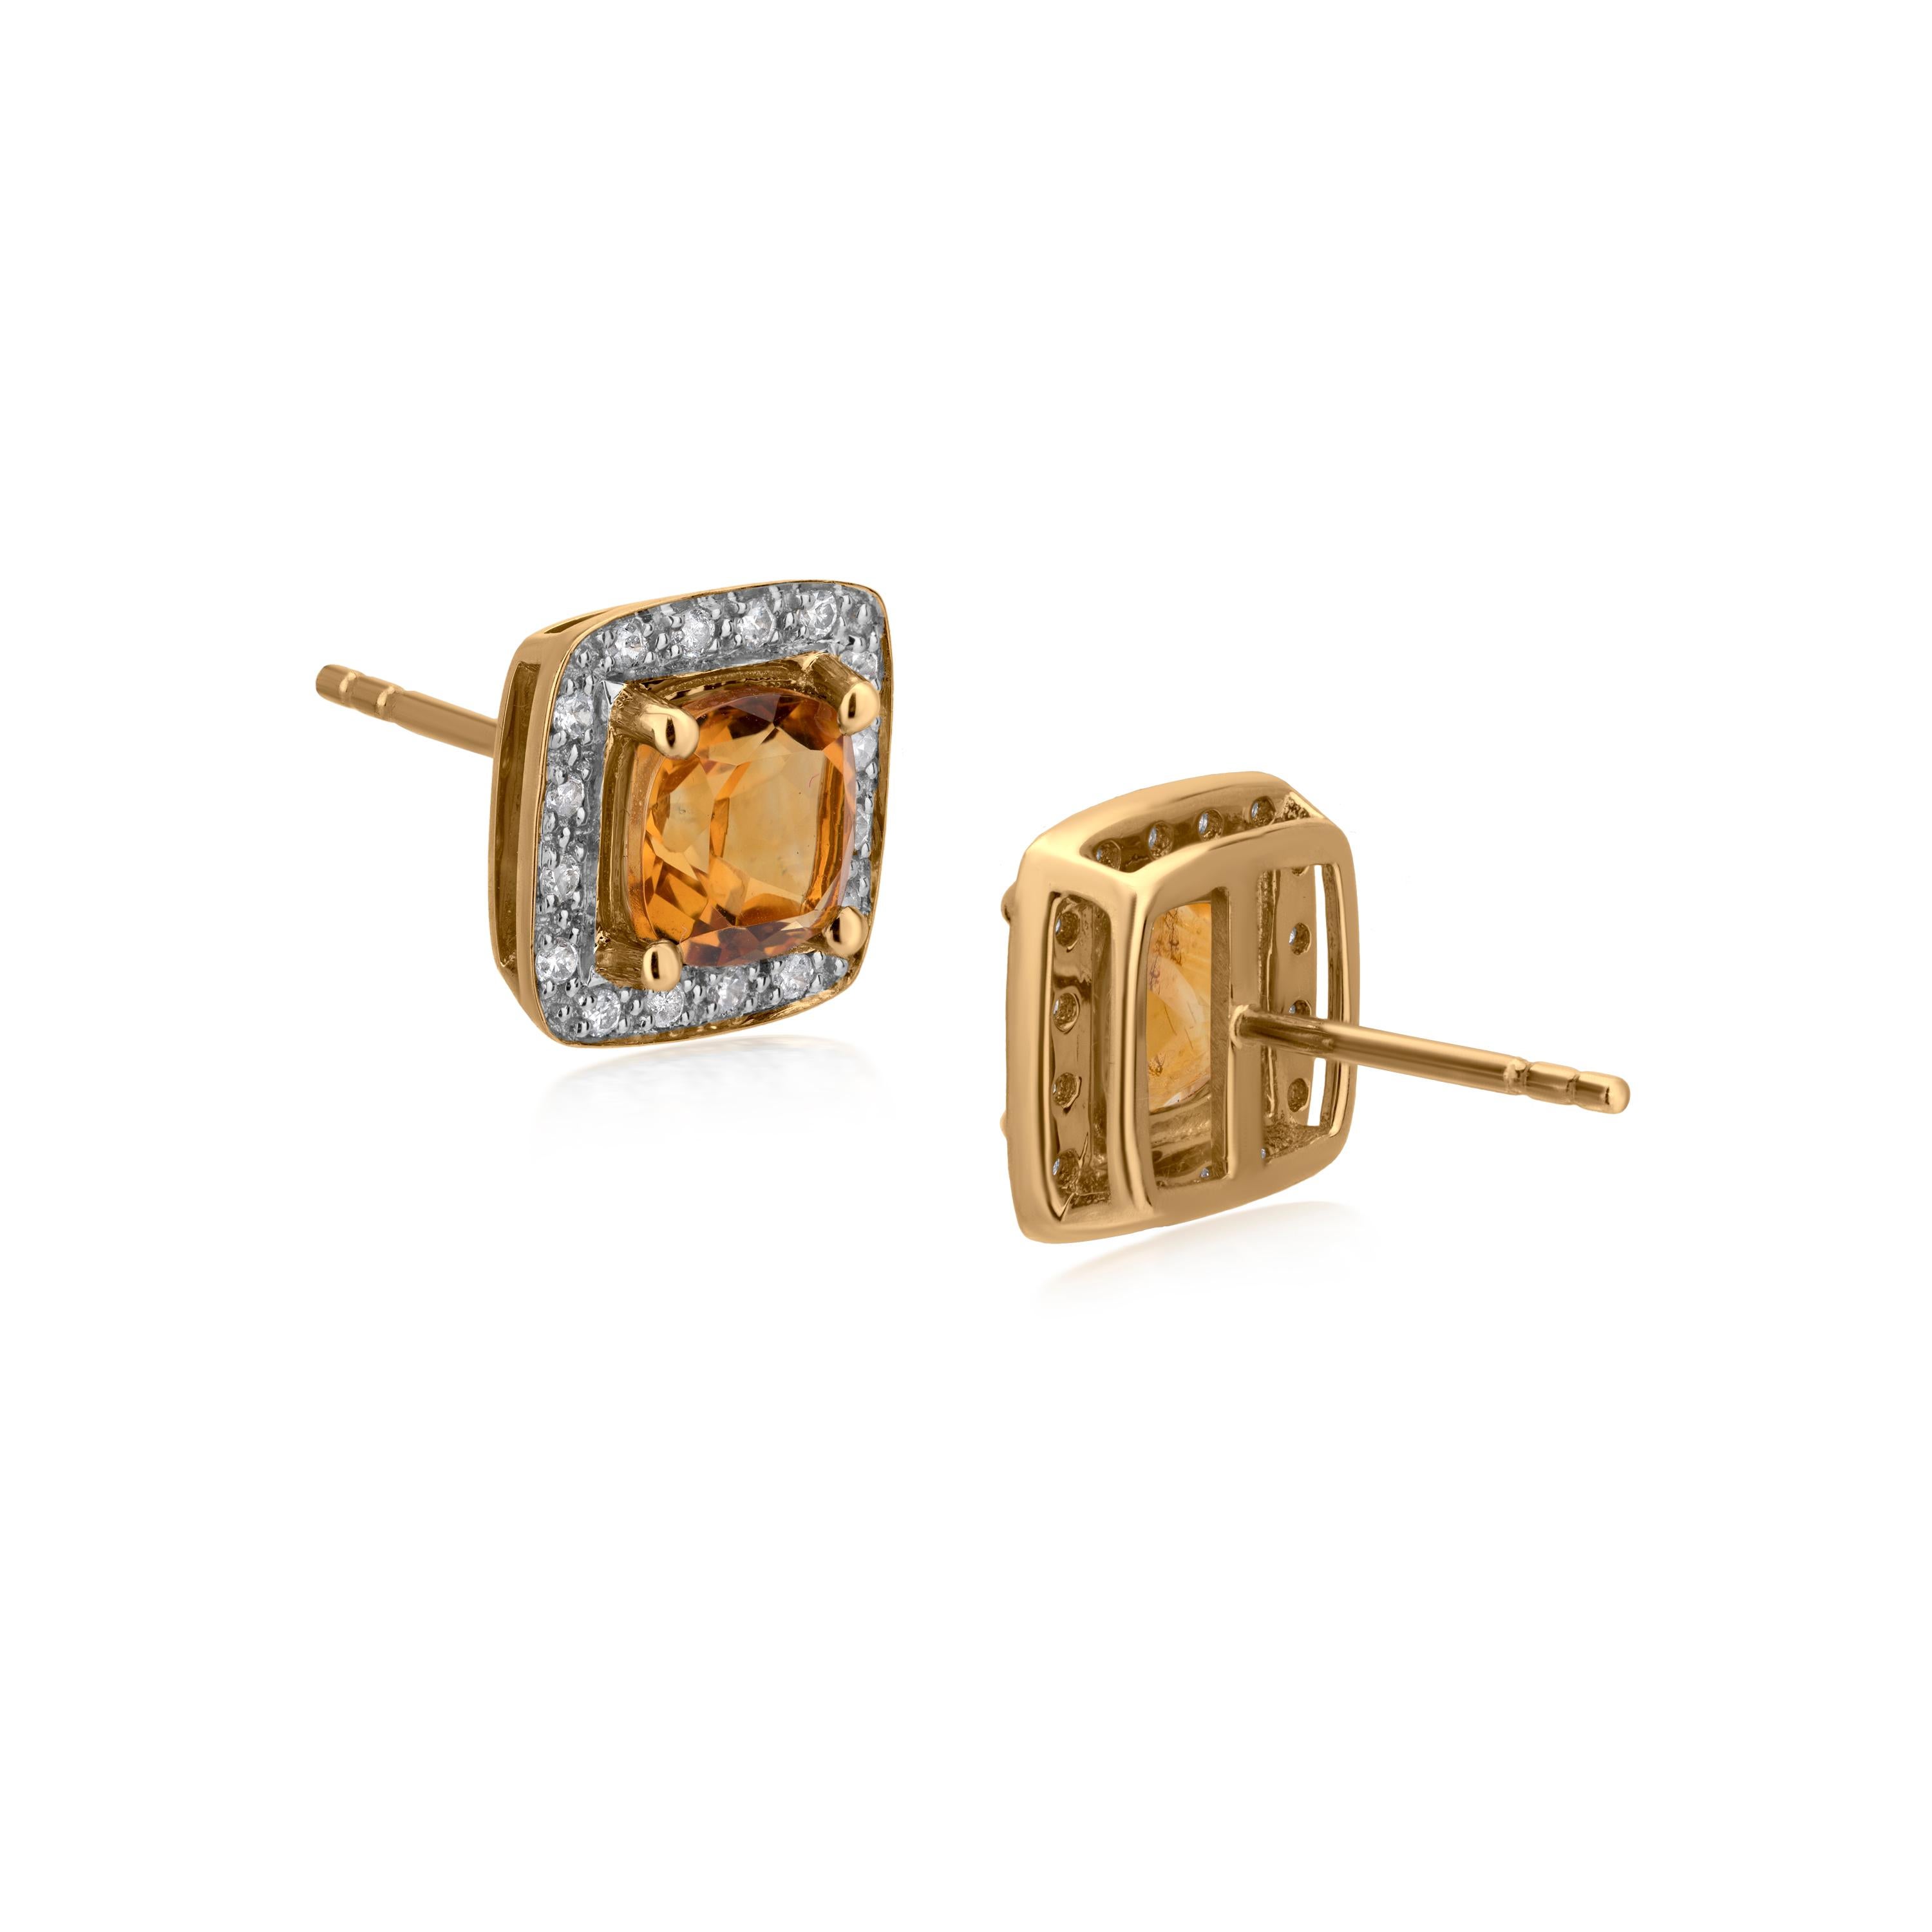 Contemporary Gemistry 1.78ct, Cushion Citrine Stud Earrings with Diamond Accents in 14k Gold